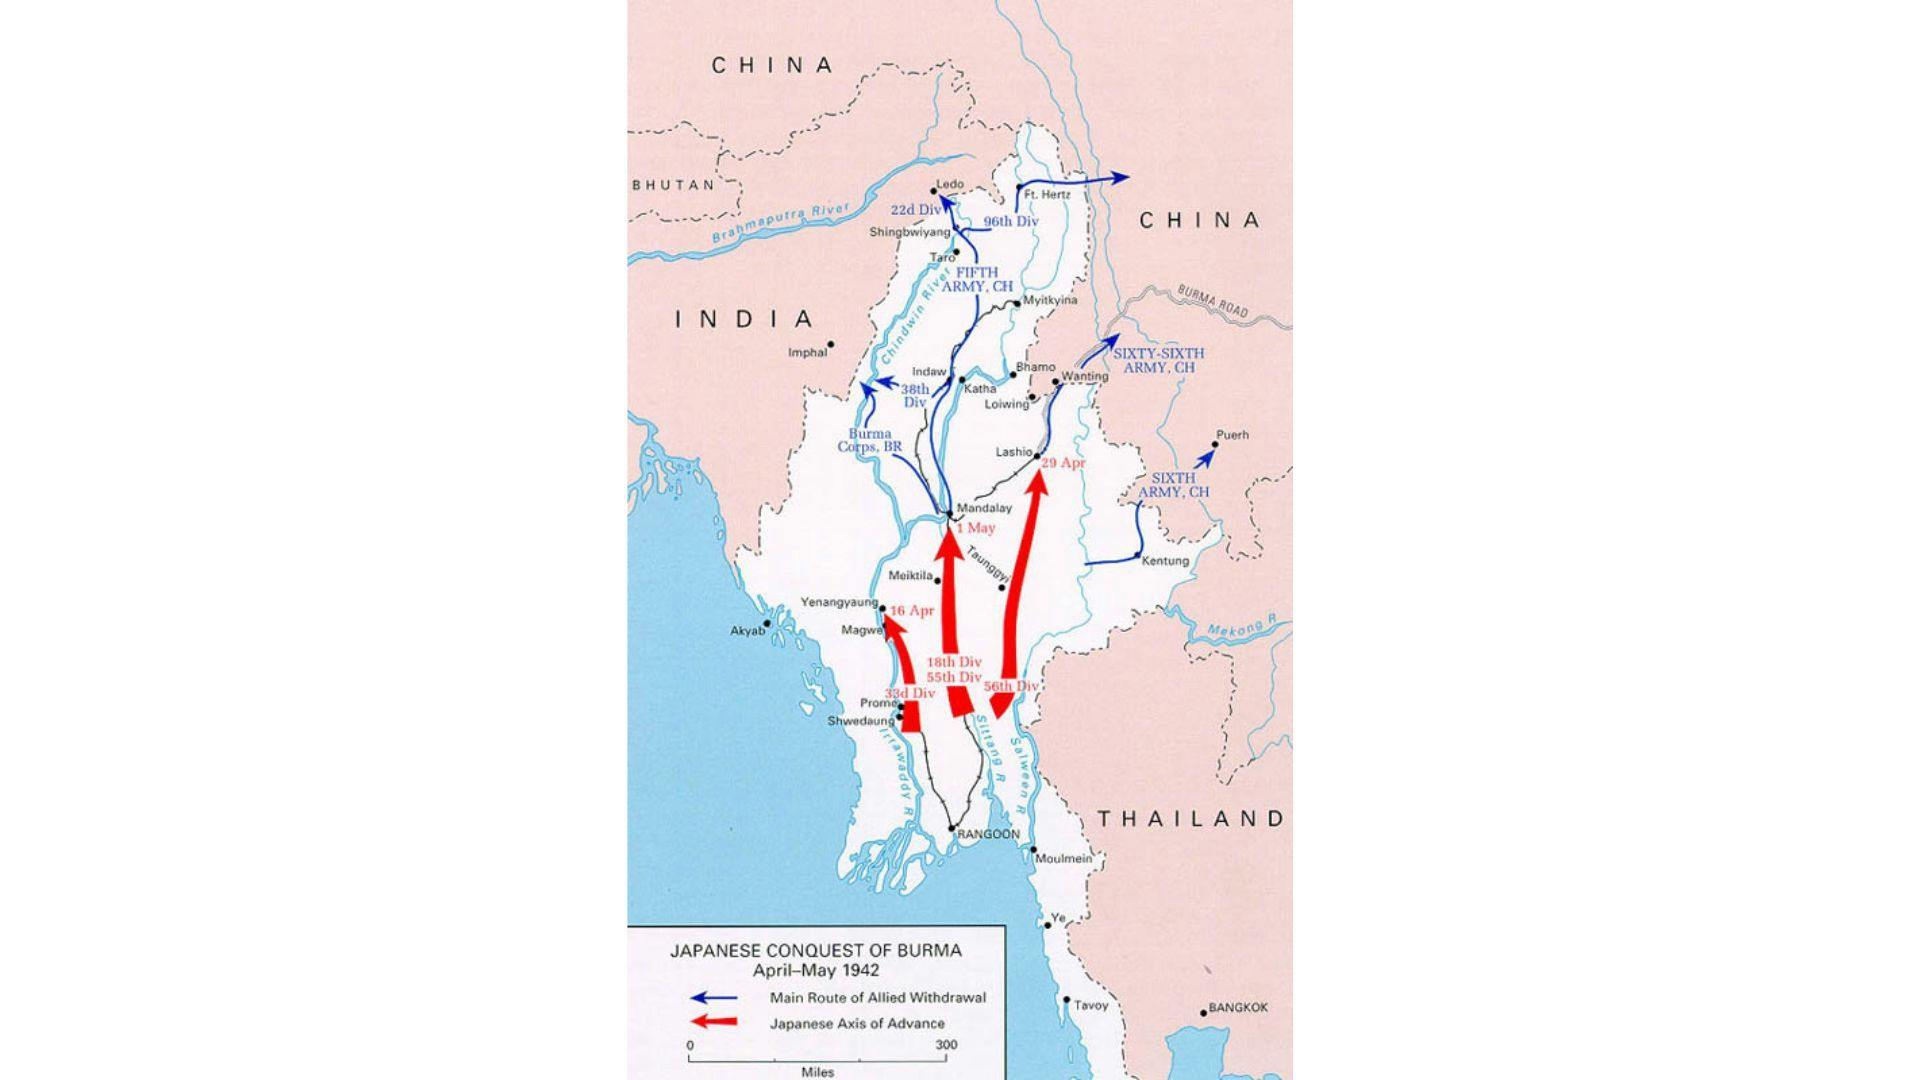 Japanese troop movements and the retreat of the British Army | Wikimedia Commons